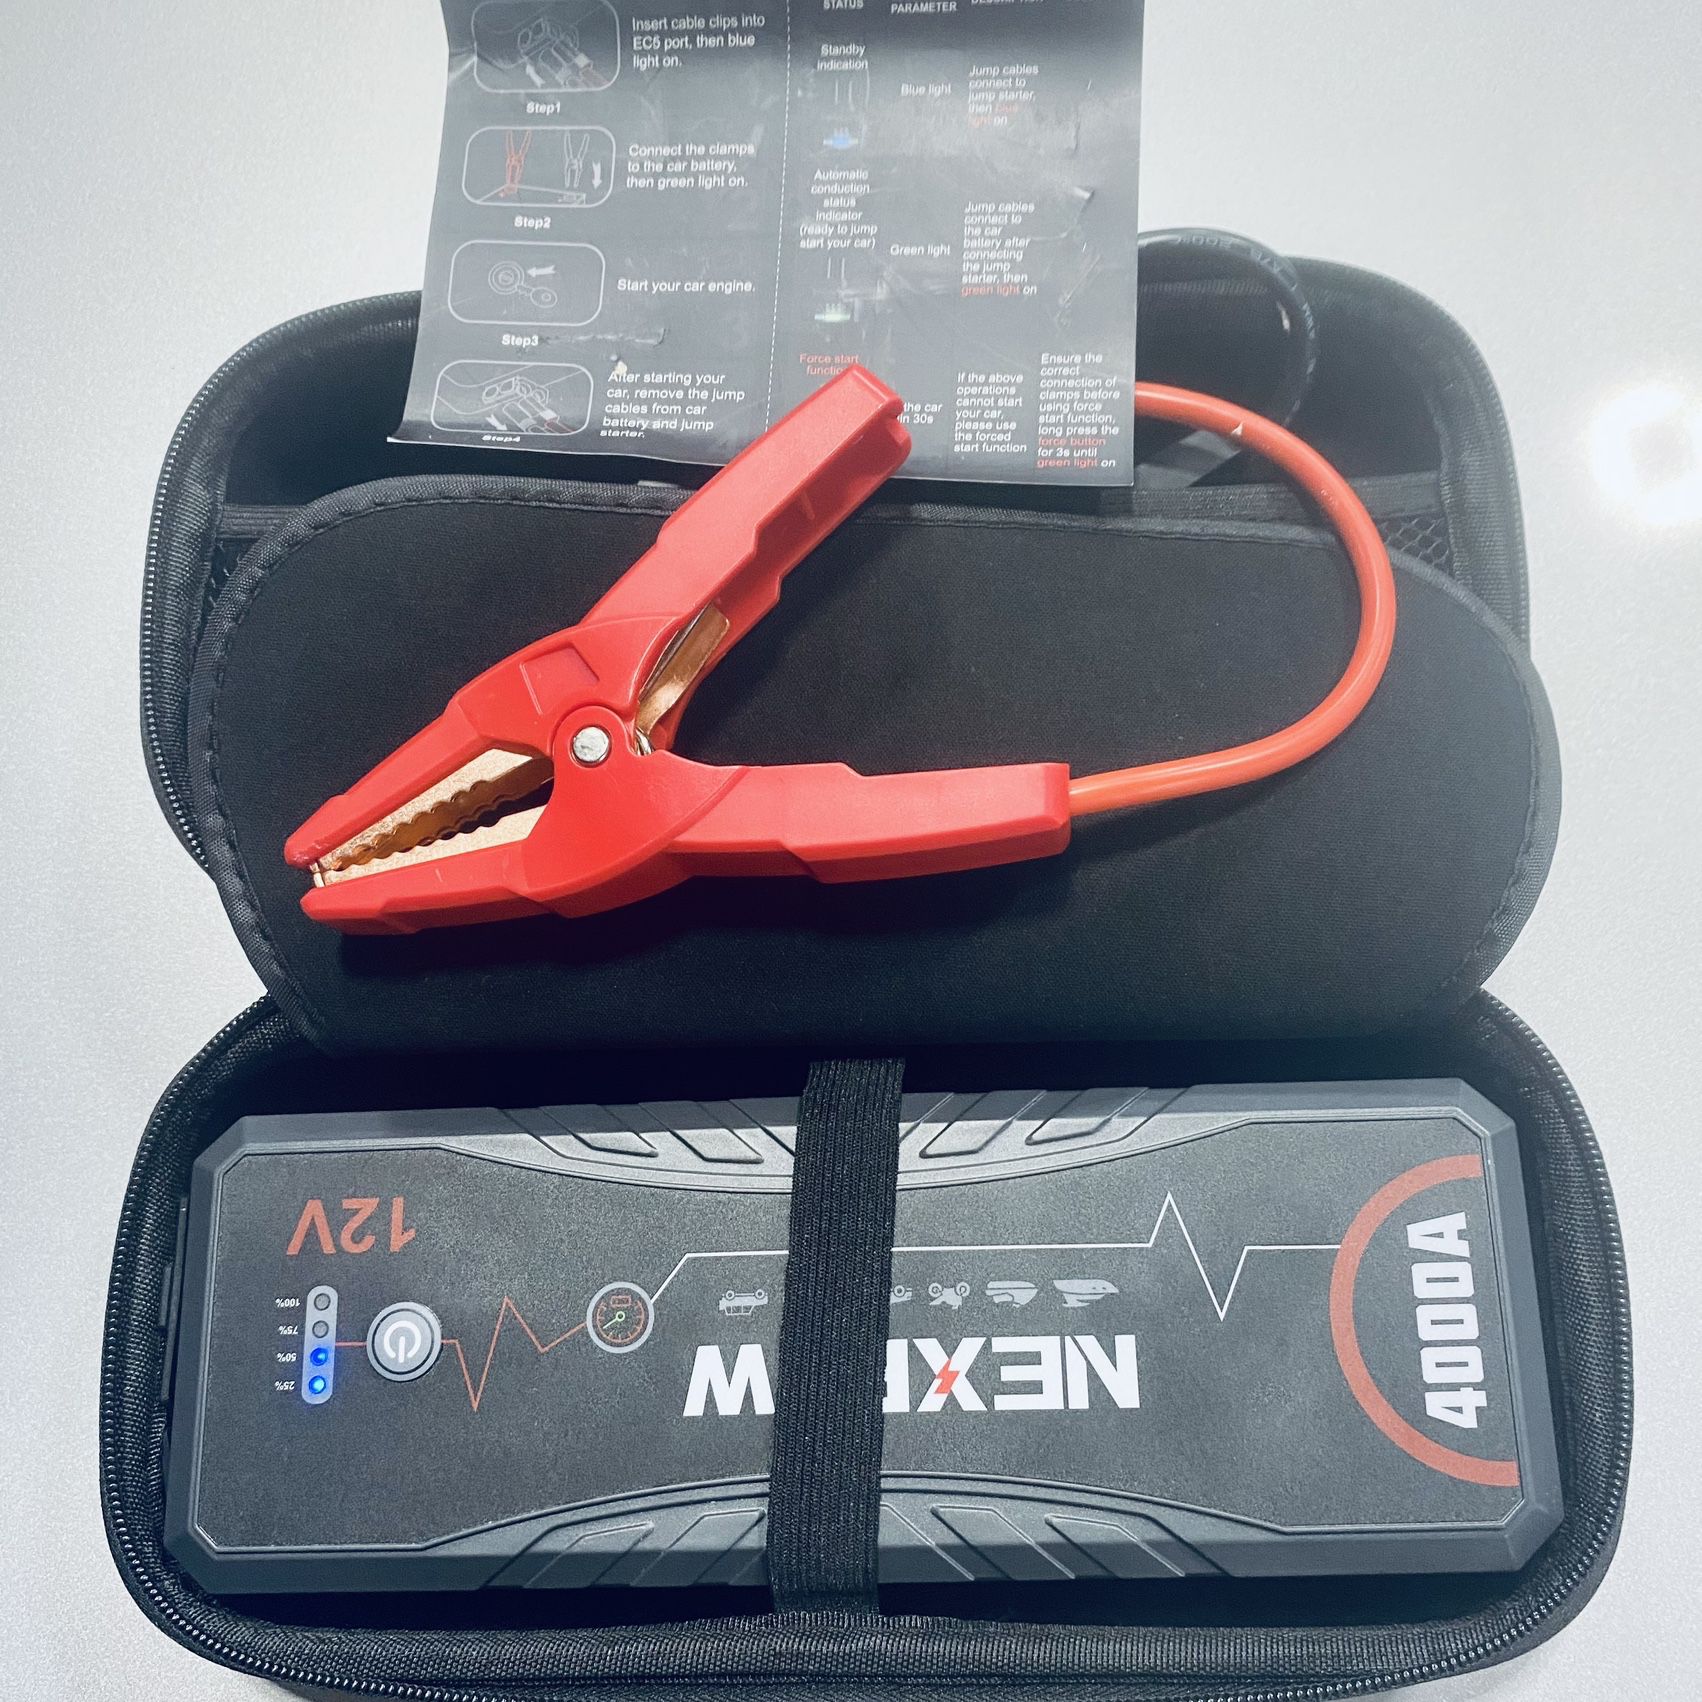 NEXPOW G17 S40 Car Jump Starter PD60W Quick Charge, 4000A Peak Jump Starter Battery Pack (All Gas Up to 10.0L Diesel Engine), 12V Lithium Jump Box